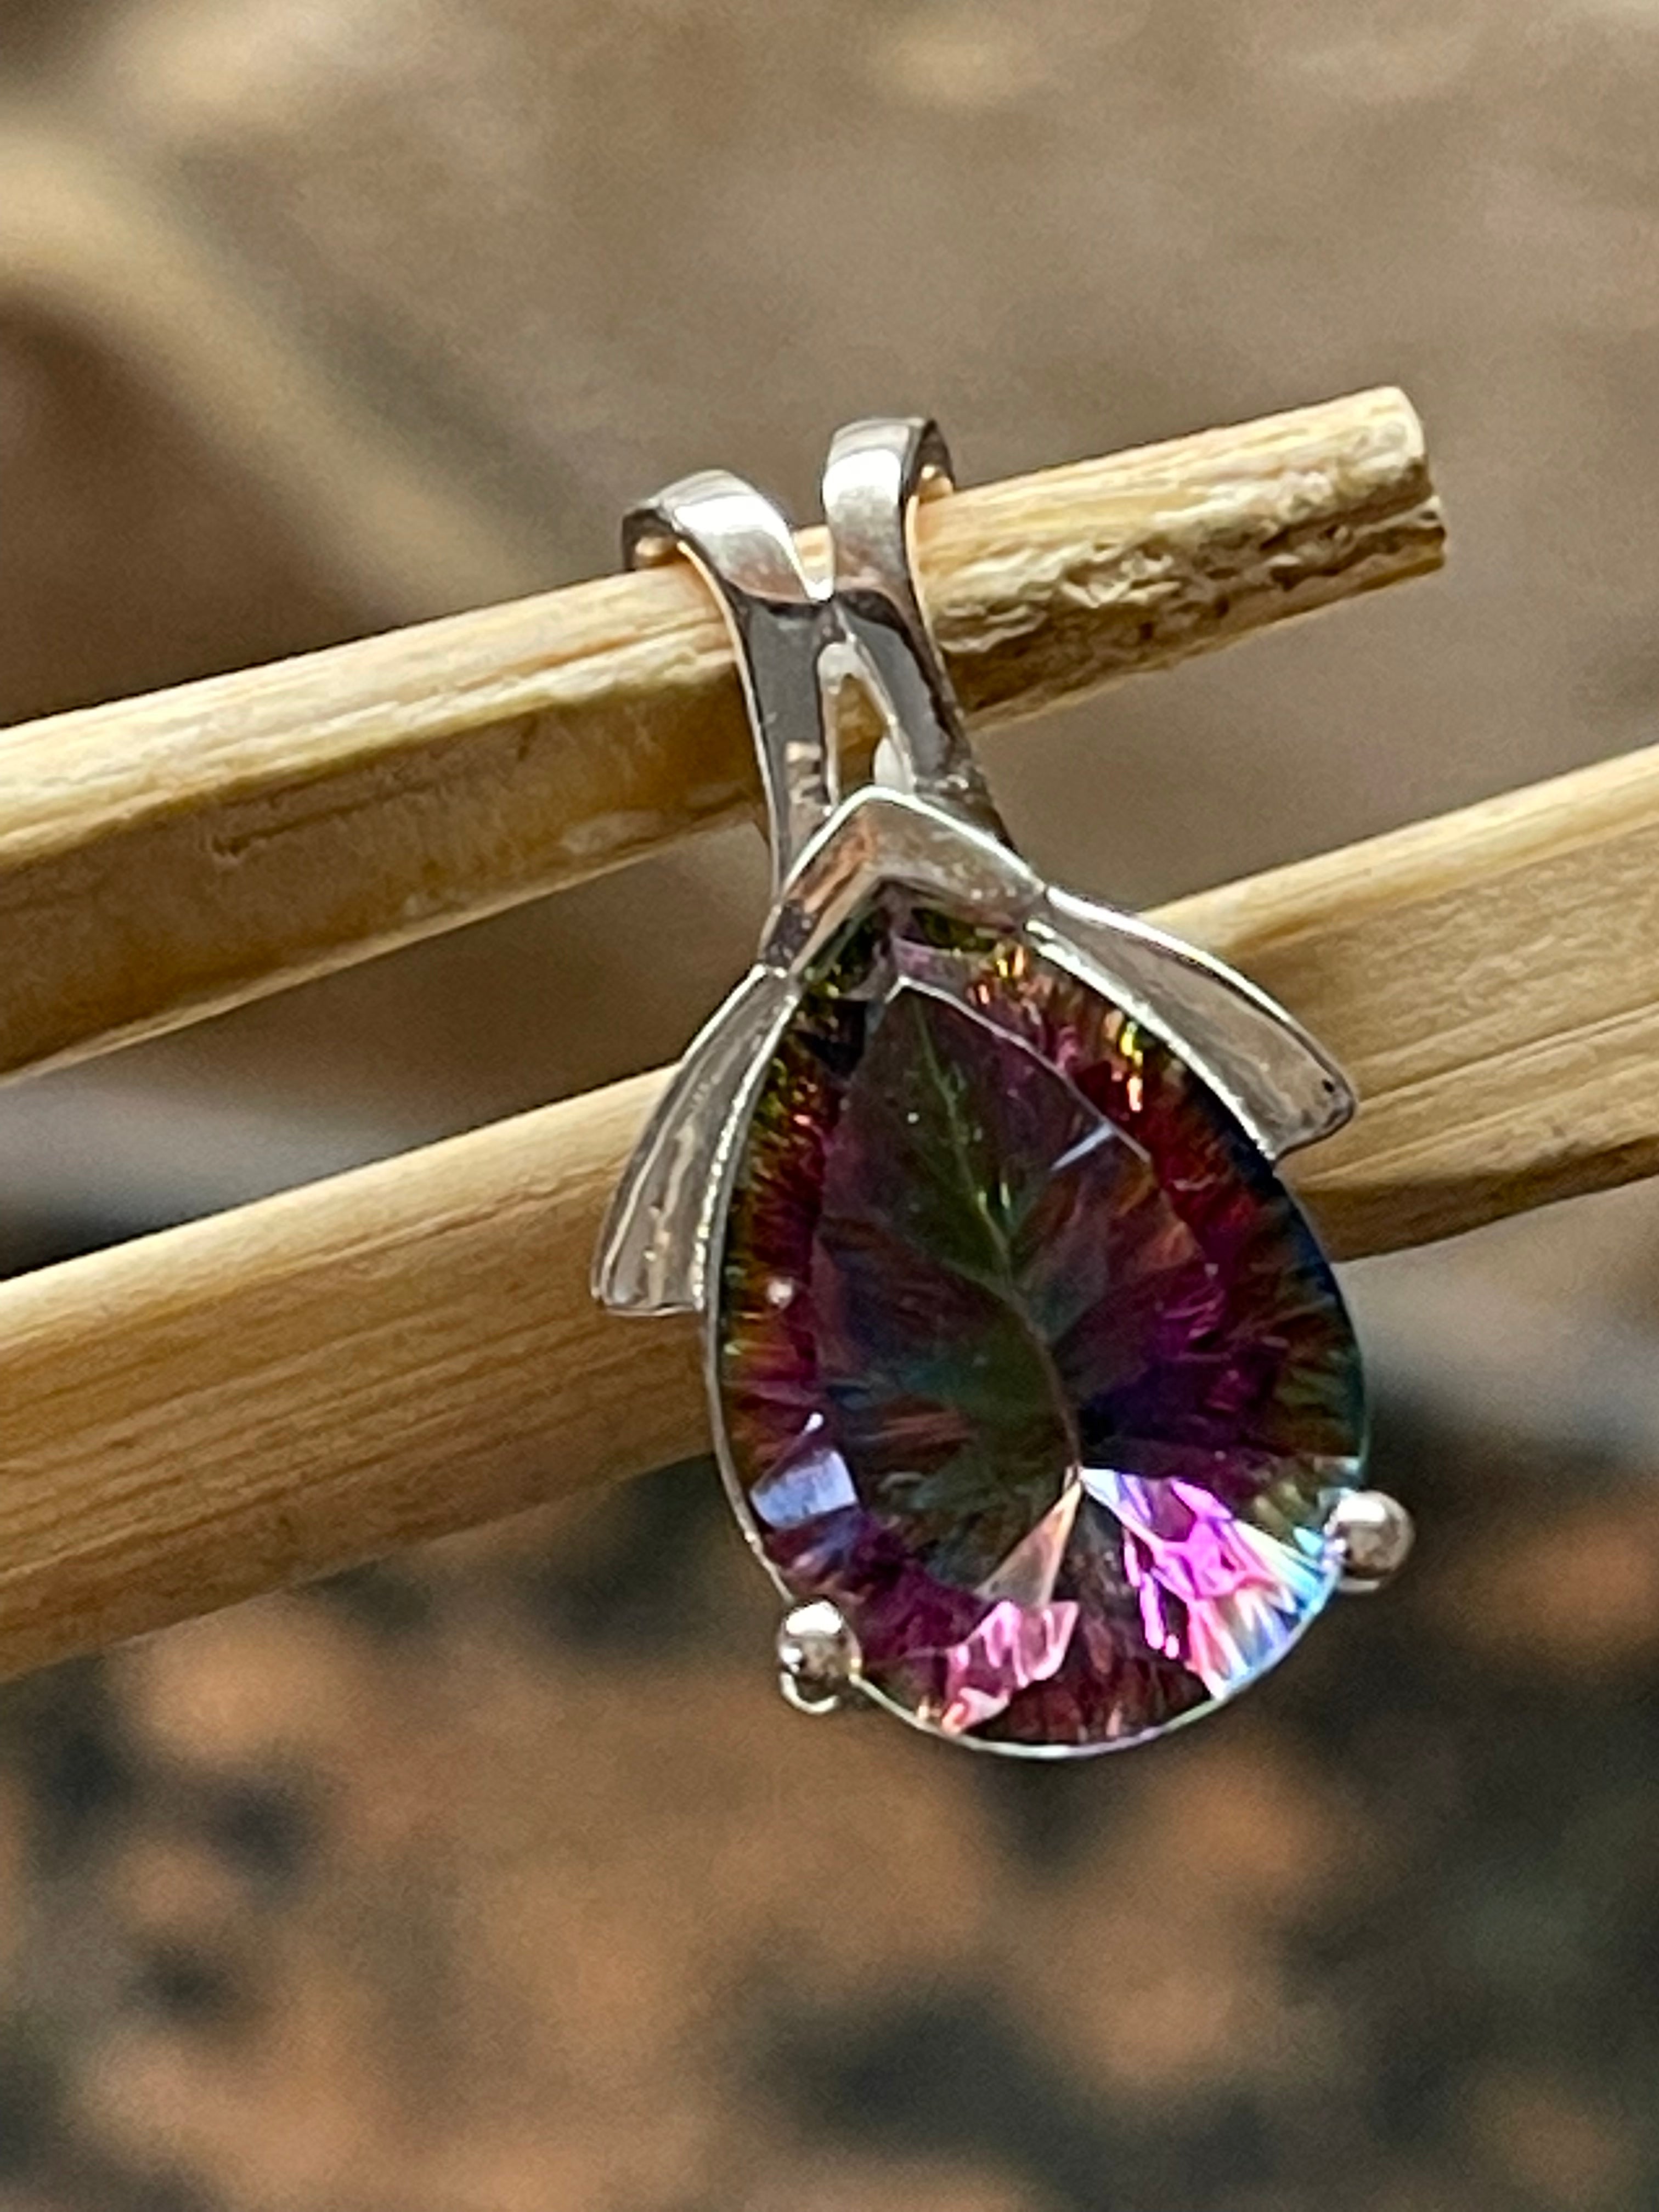 8ct Rainbow Mystic Topaz 925 Solid Sterling Silver Pendant 25mm - Natural Rocks by Kala